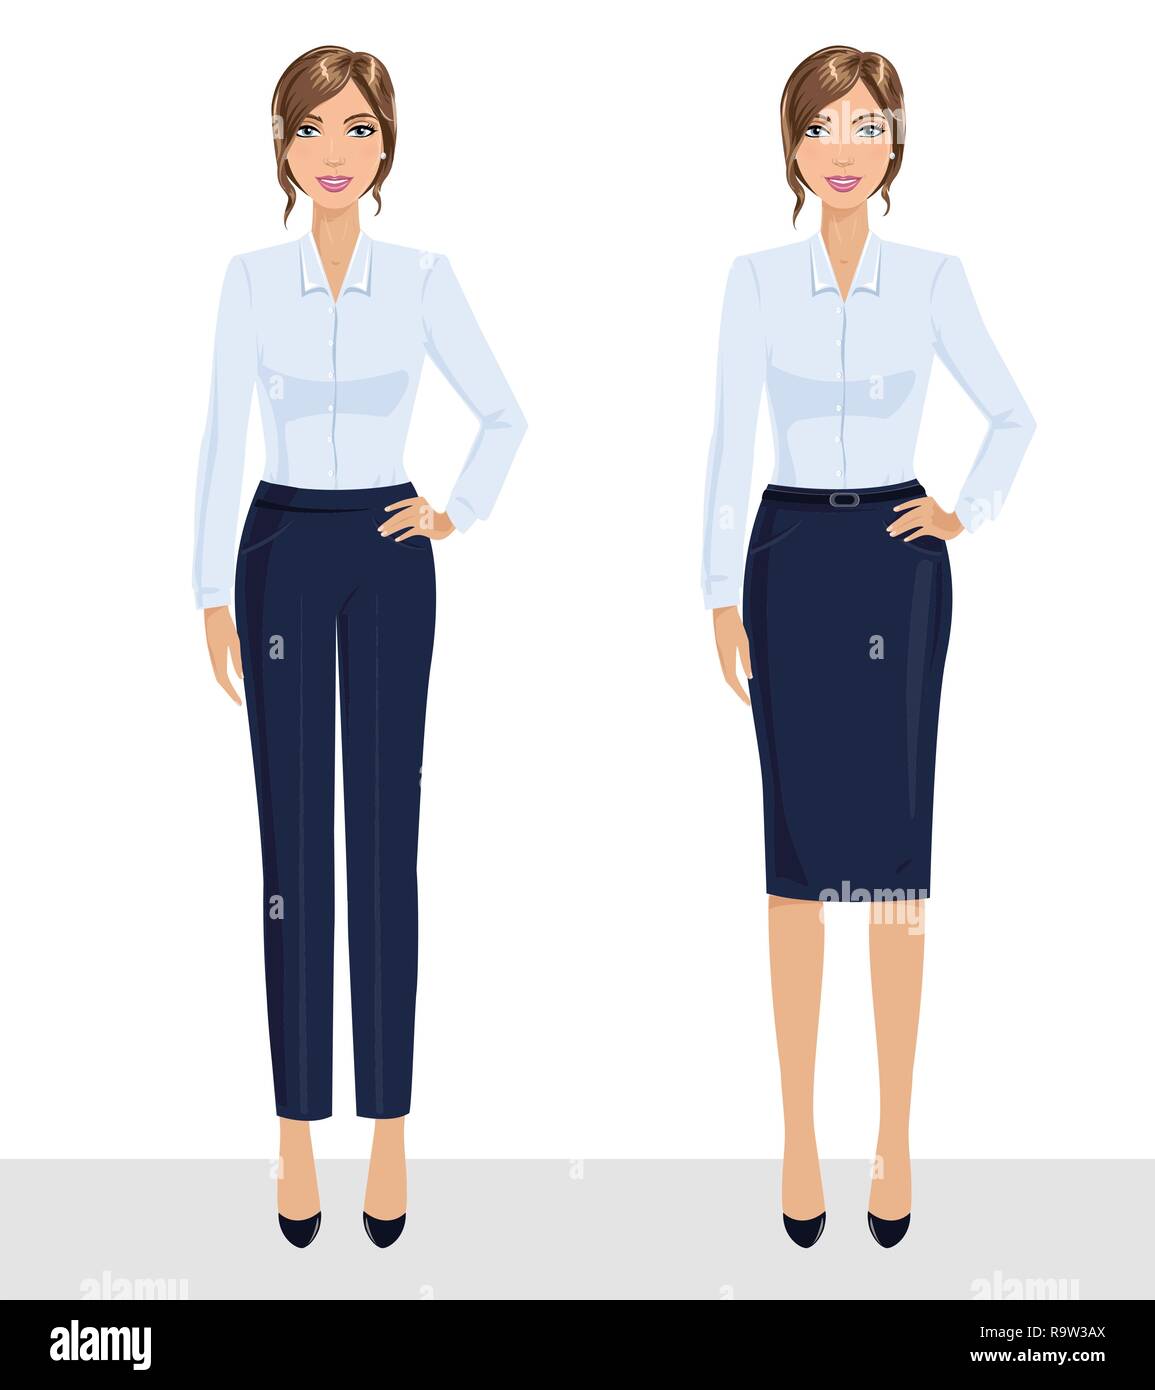 Elegant pretty business woman in formal clothes. Base wardrobe, feminine corporate dress code. Collection of full length portraits of business woman. Stock Vector